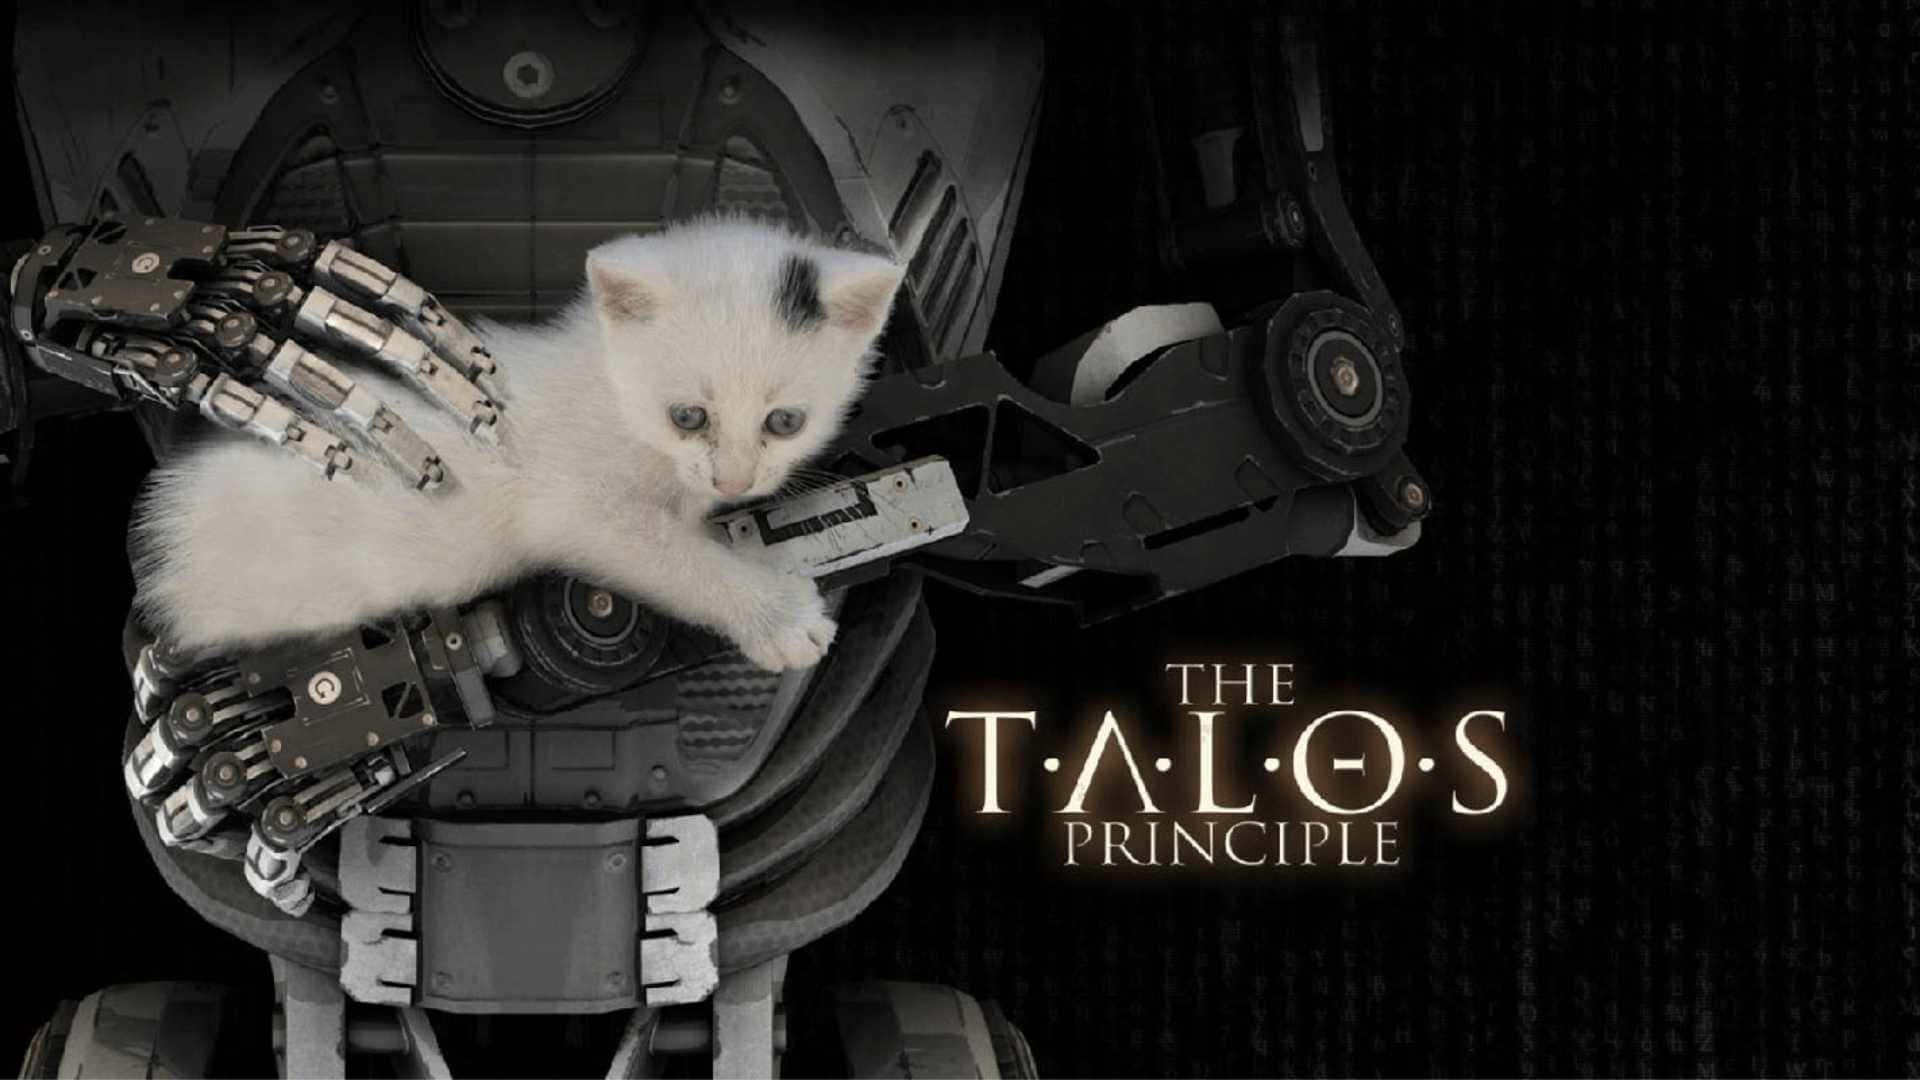 Stunning HD Image from The Talos Principle Game